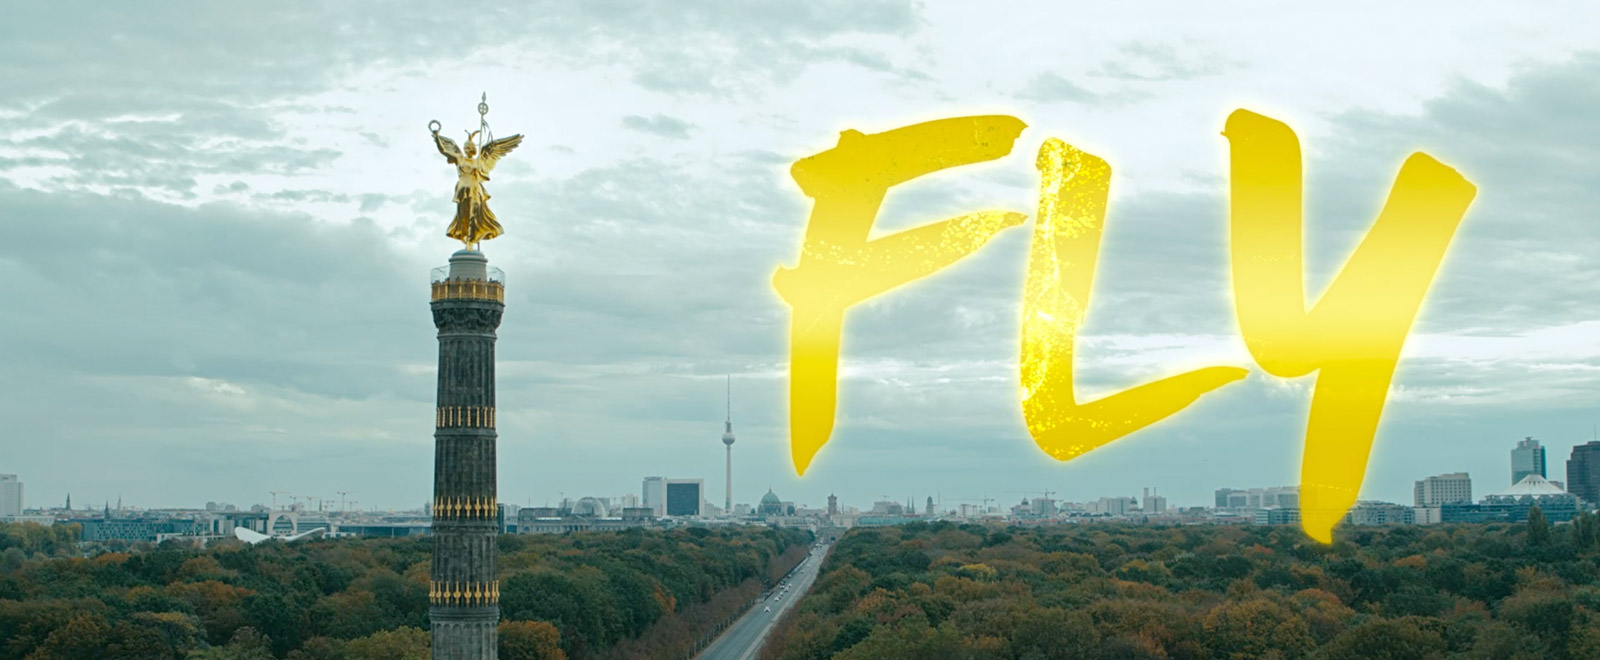 Main Titles zu Kinospielfilm »FLY« – example image of the animation | MARIA LISSEL Animation + Motion Design | maria-lissel.de